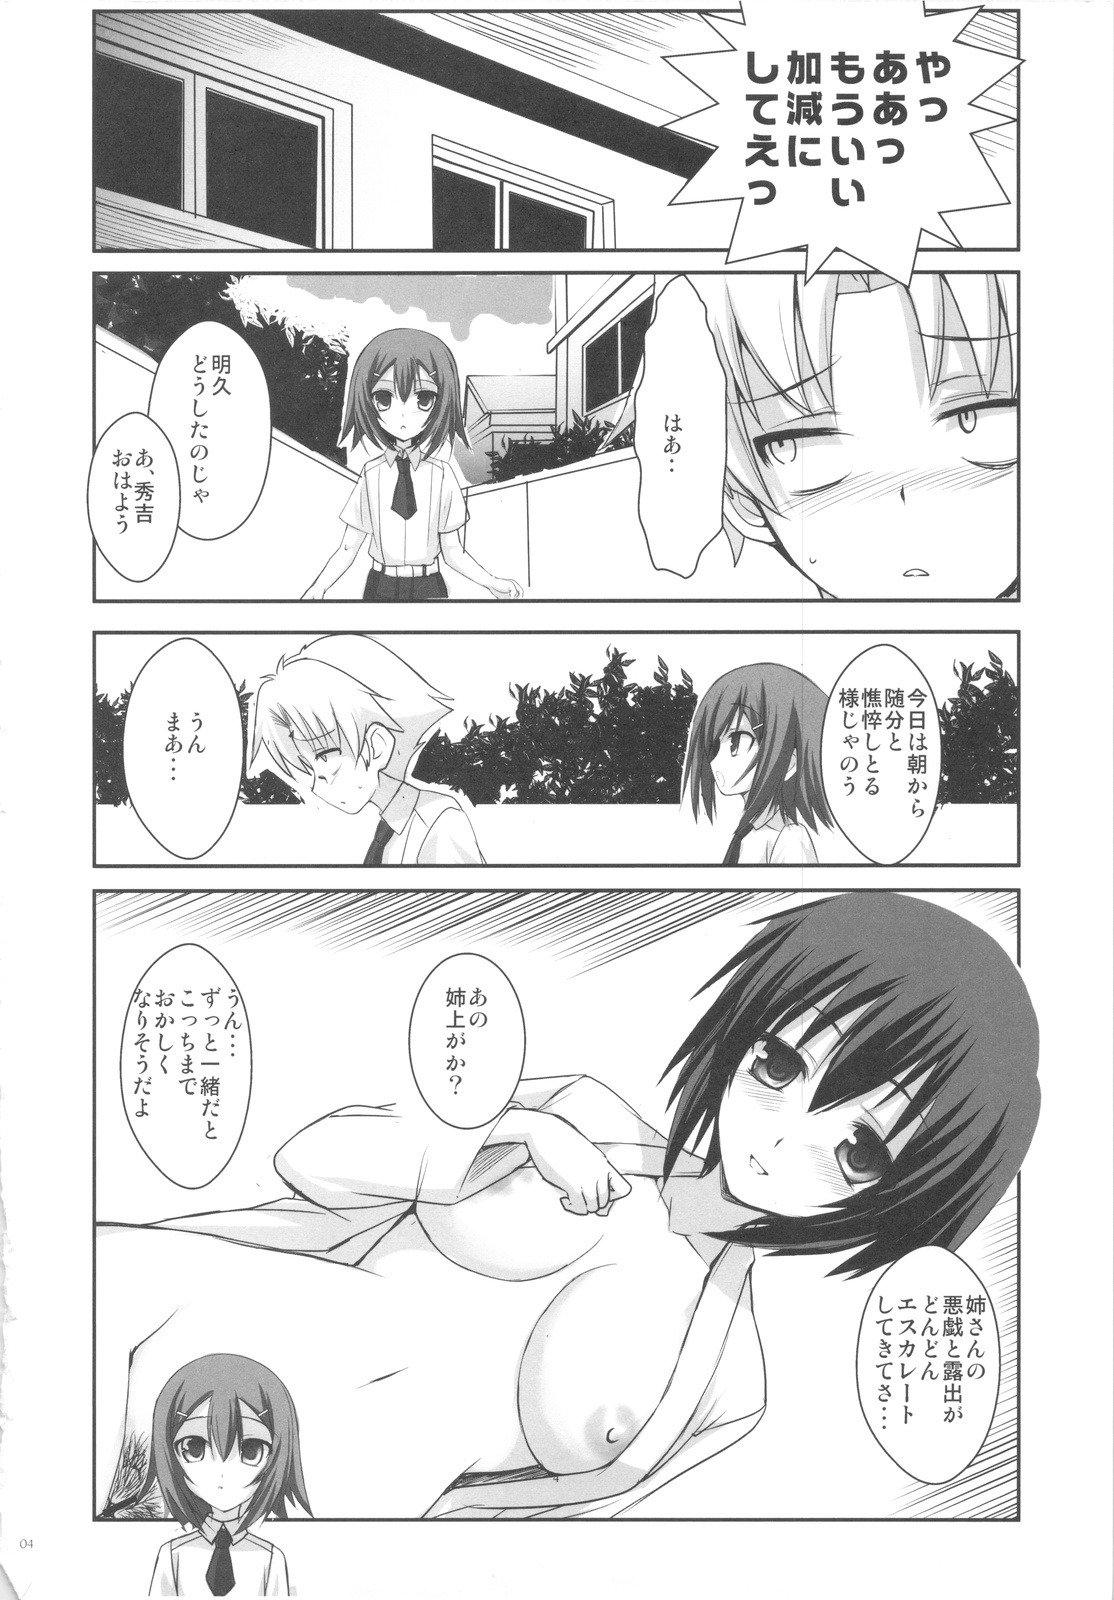 (COMIC1☆4) [R-WORKS] LOVE IS GAME OVER (Baka to Test to Shoukanjuu) page 4 full